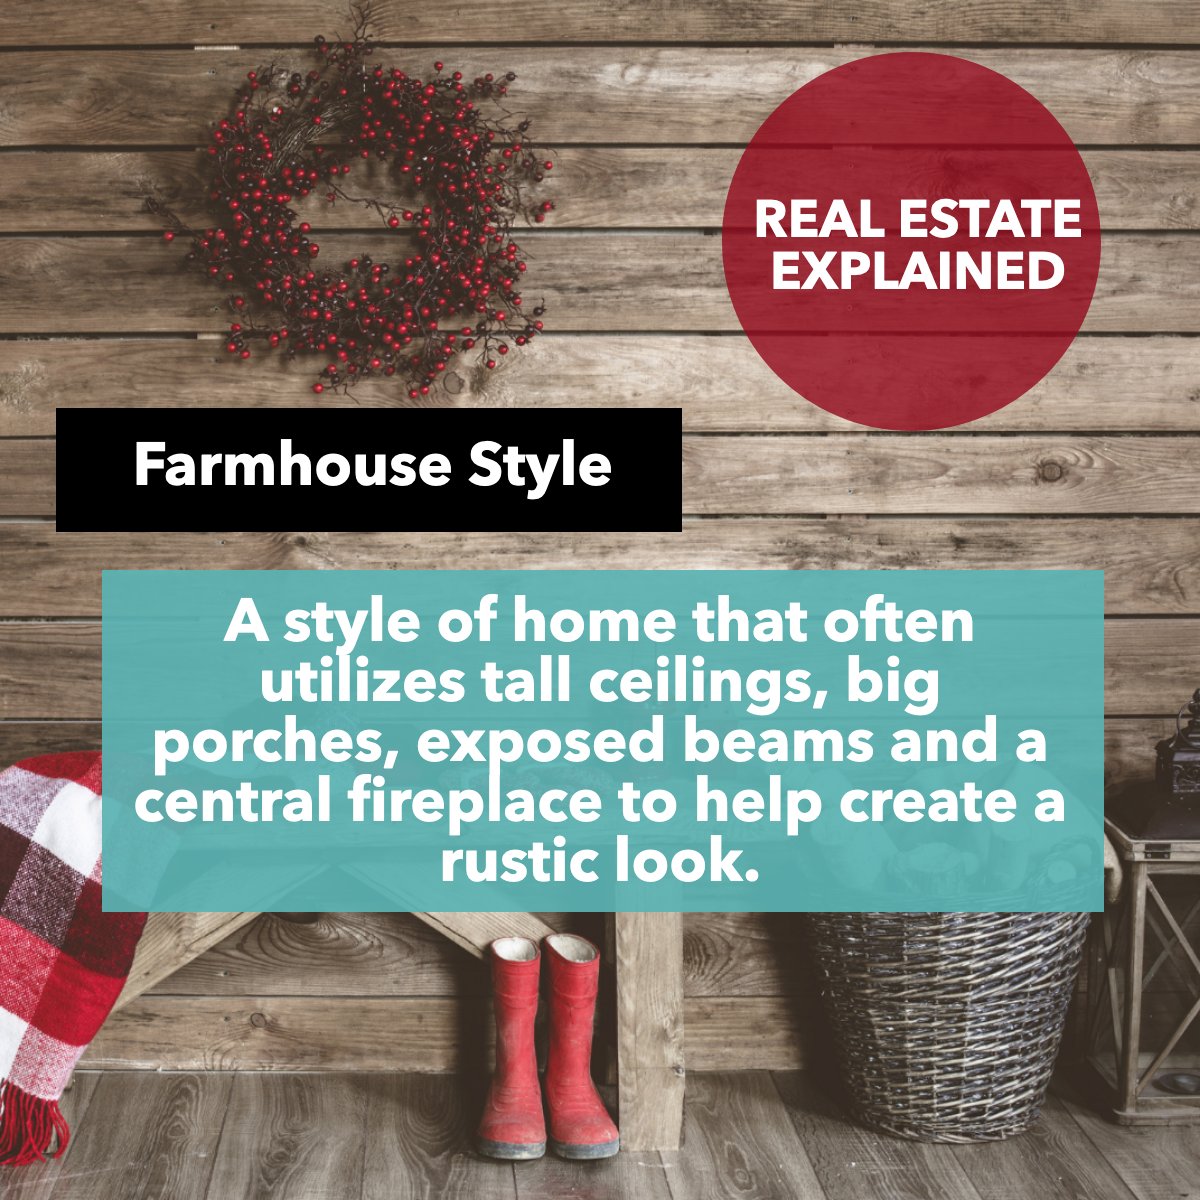 Did you know 🤔 what a Farmhouse Style is 🏡

Is this the type of house that you like

#farmhousestylehome #farmhousestyledesign #farmhousestyleinspired #farmhouseismystyle